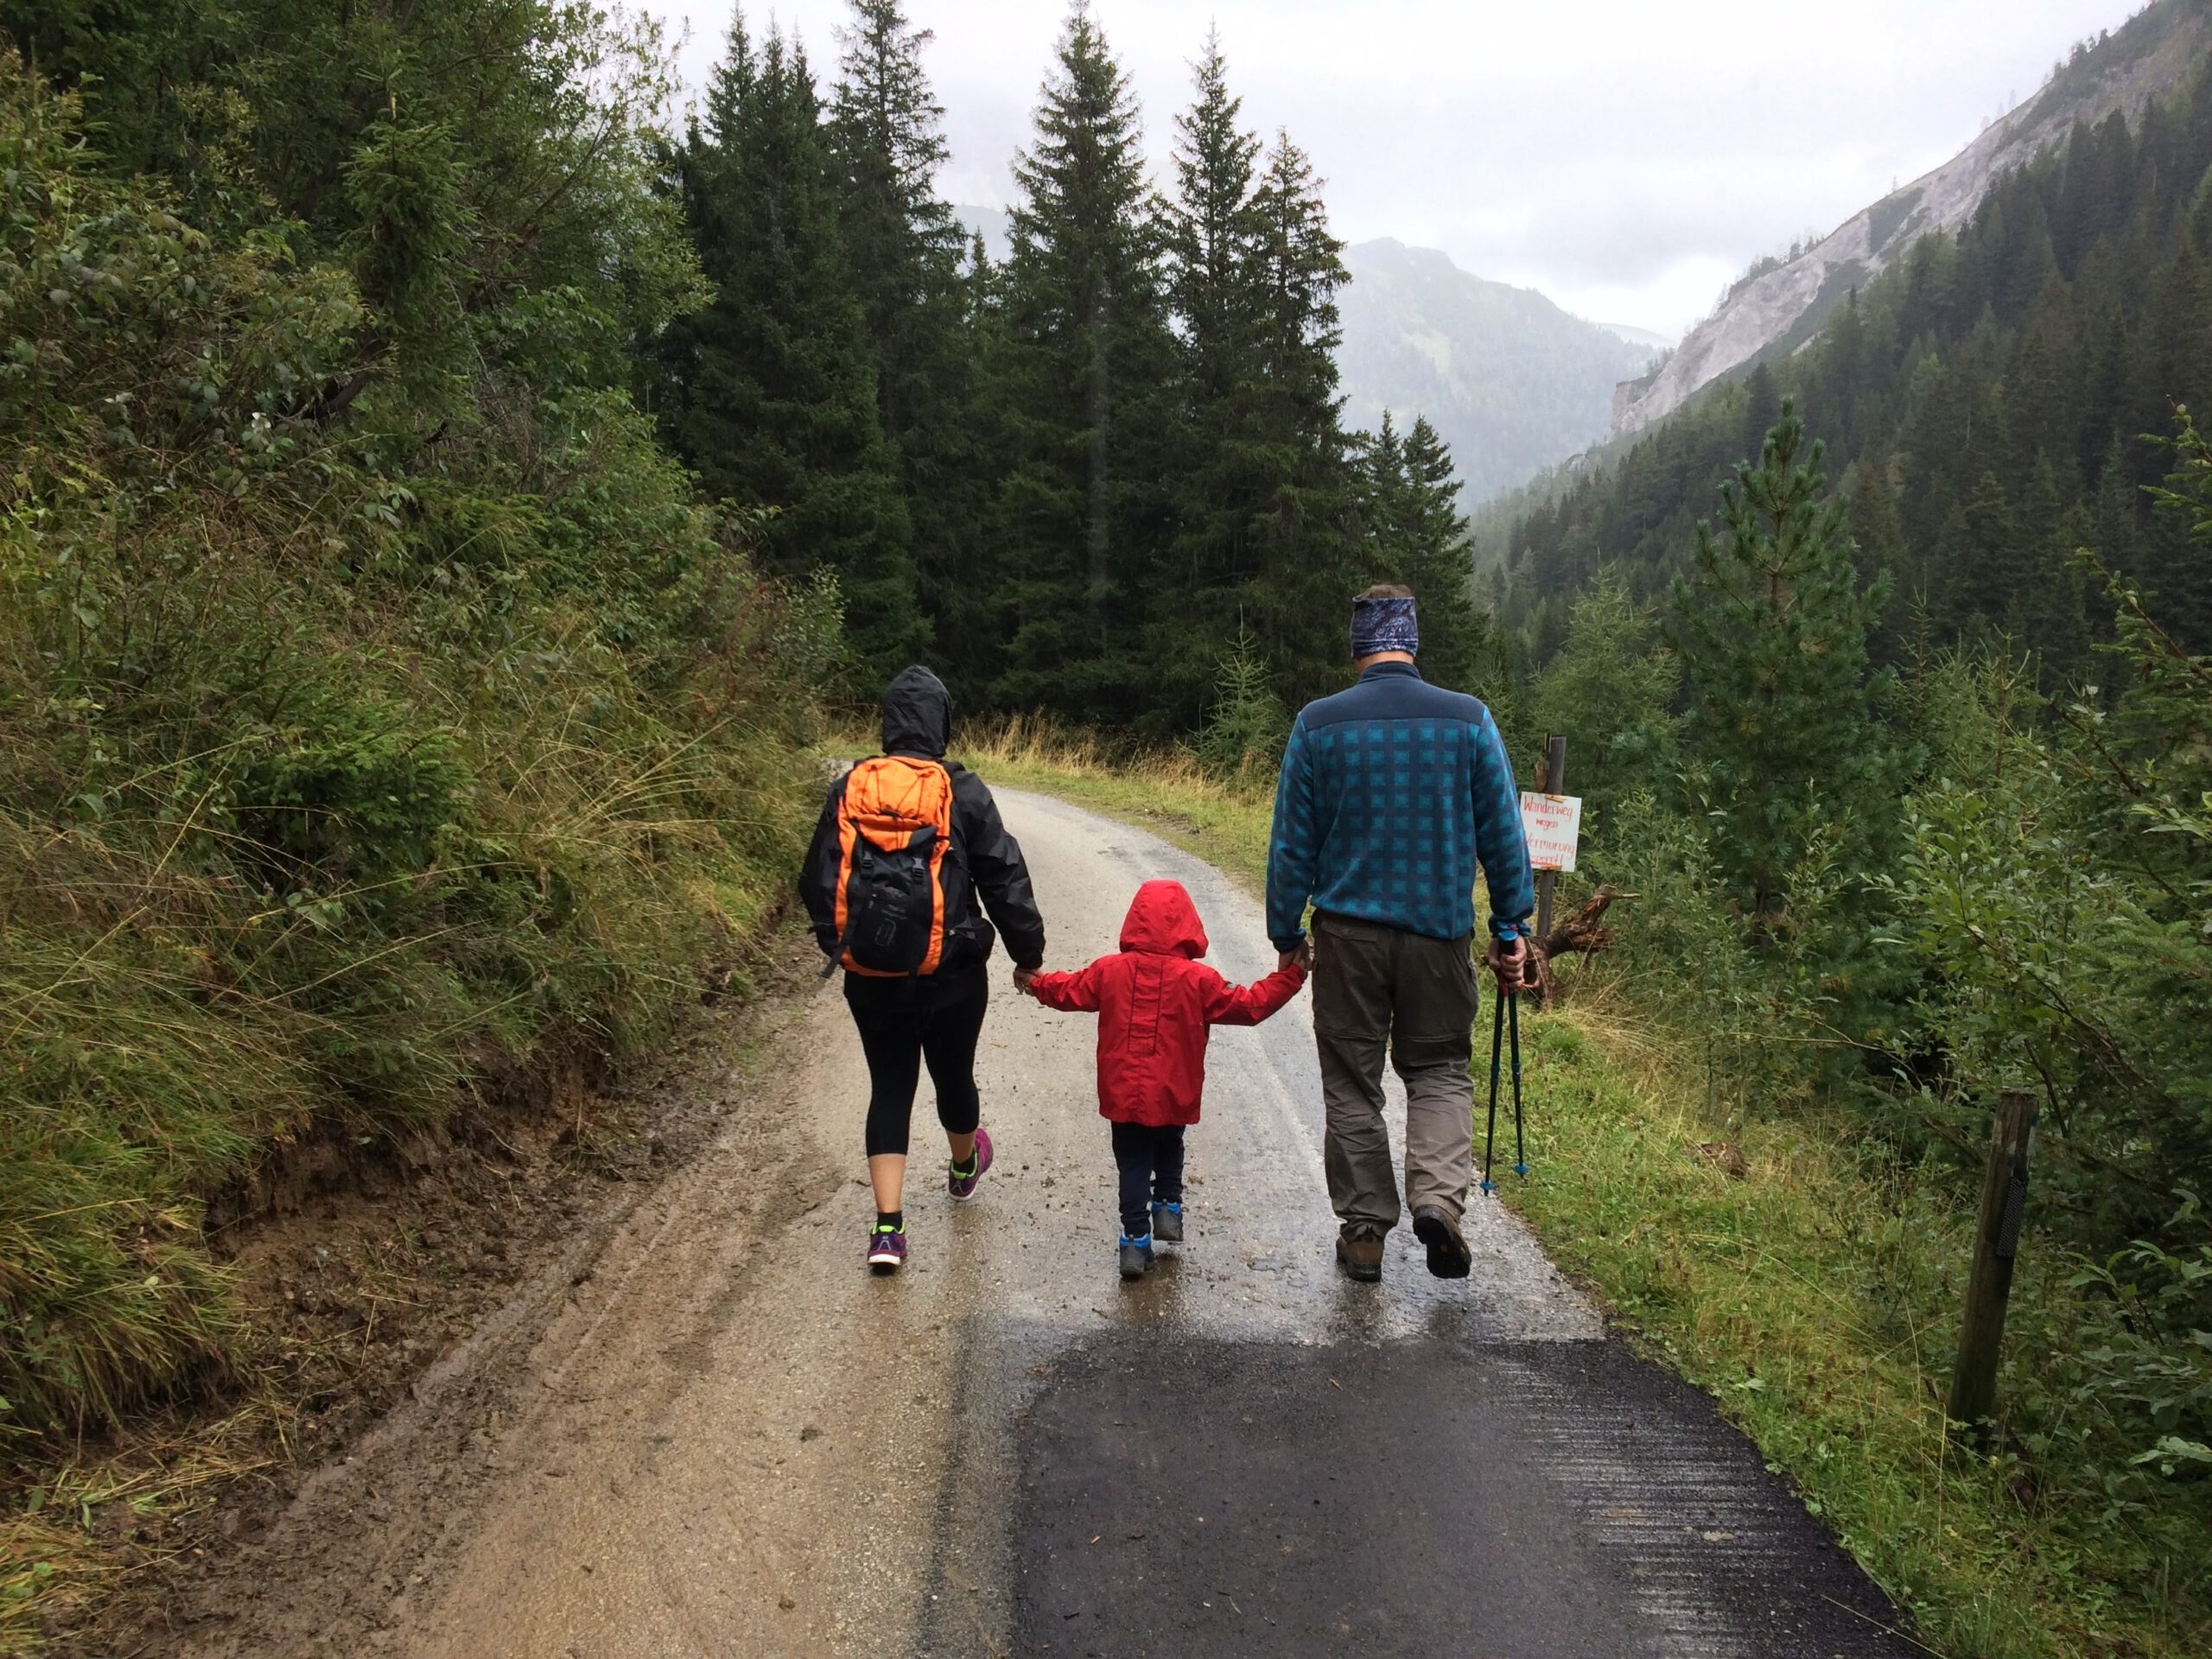 Parents walking in forest with small child